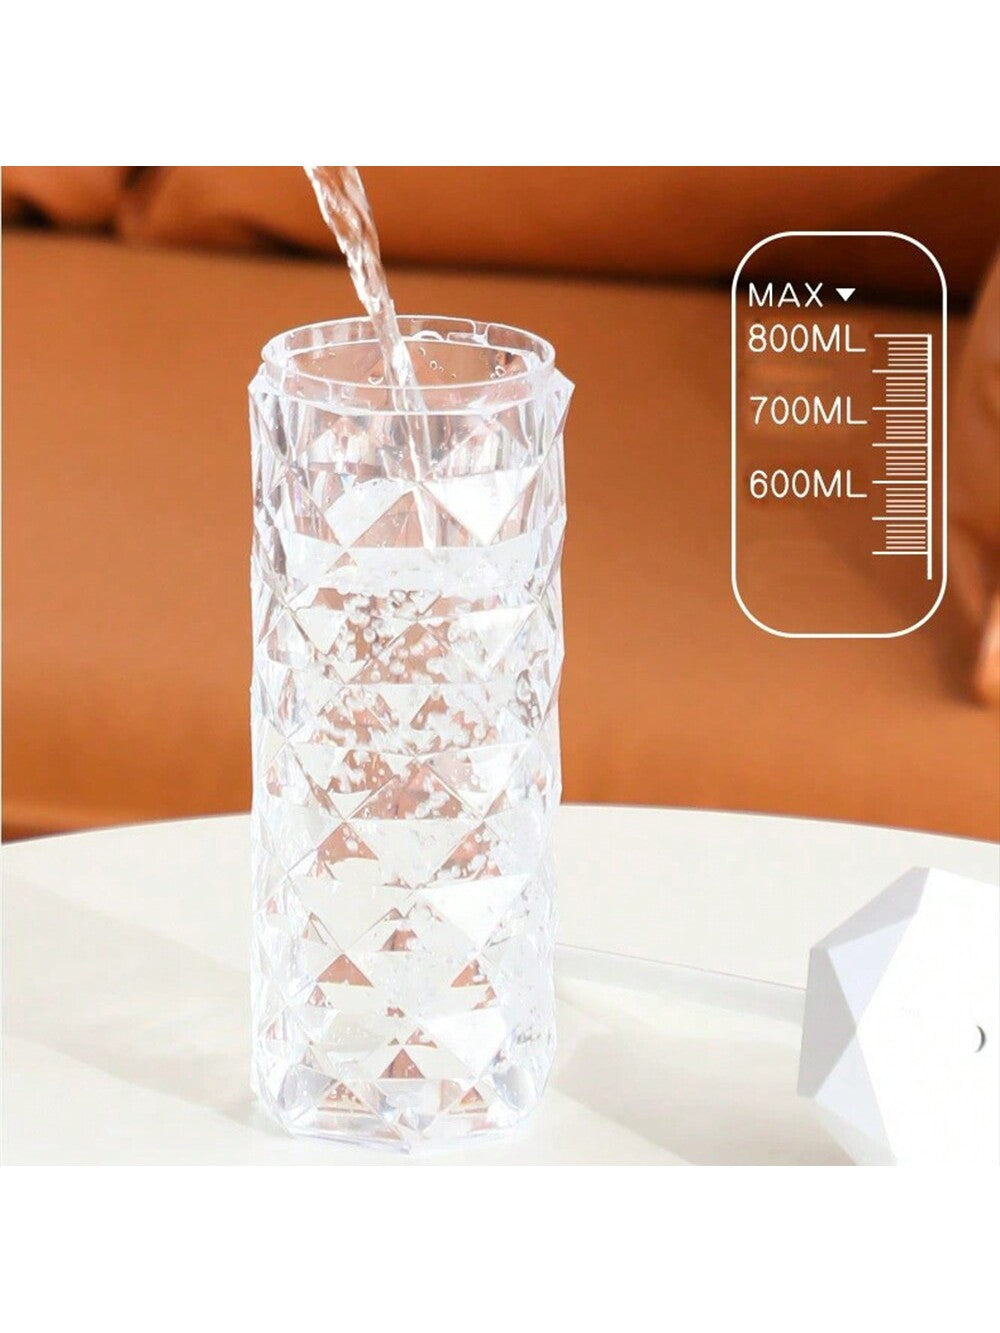 Crystal humidifier home small quiet colorful atmosphere bedroom desktop car USB humidifier high appearance level atmosphere light, bedroom bedside night light air humidifier home quiet bedroom fog amount student dormitory-White-2